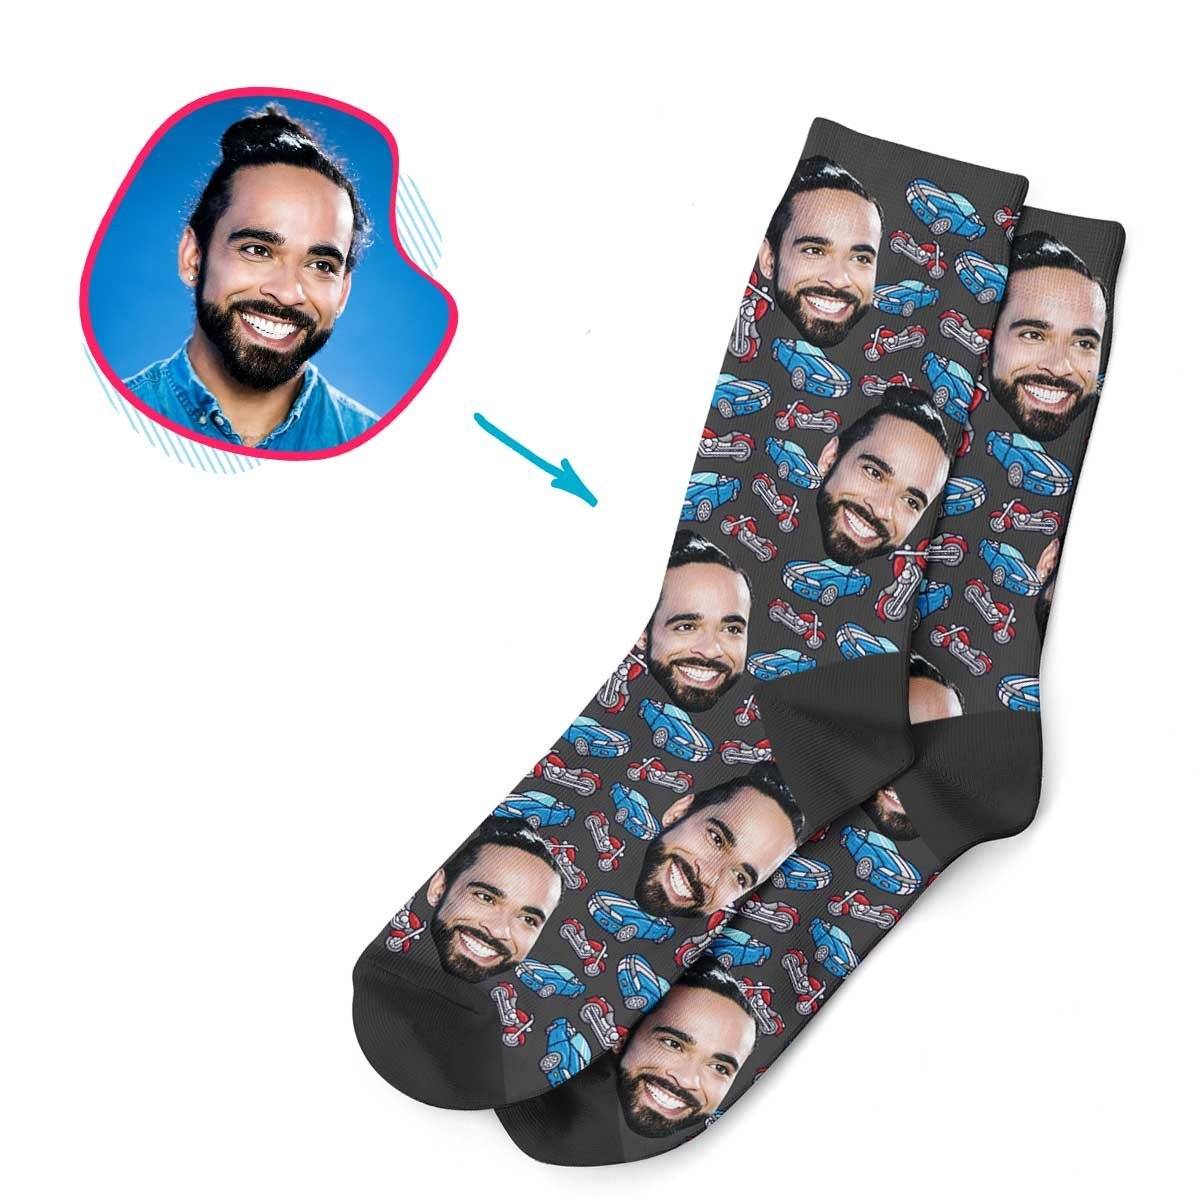 Dark Cars & Motorbikes personalized socks with photo of face printed on them